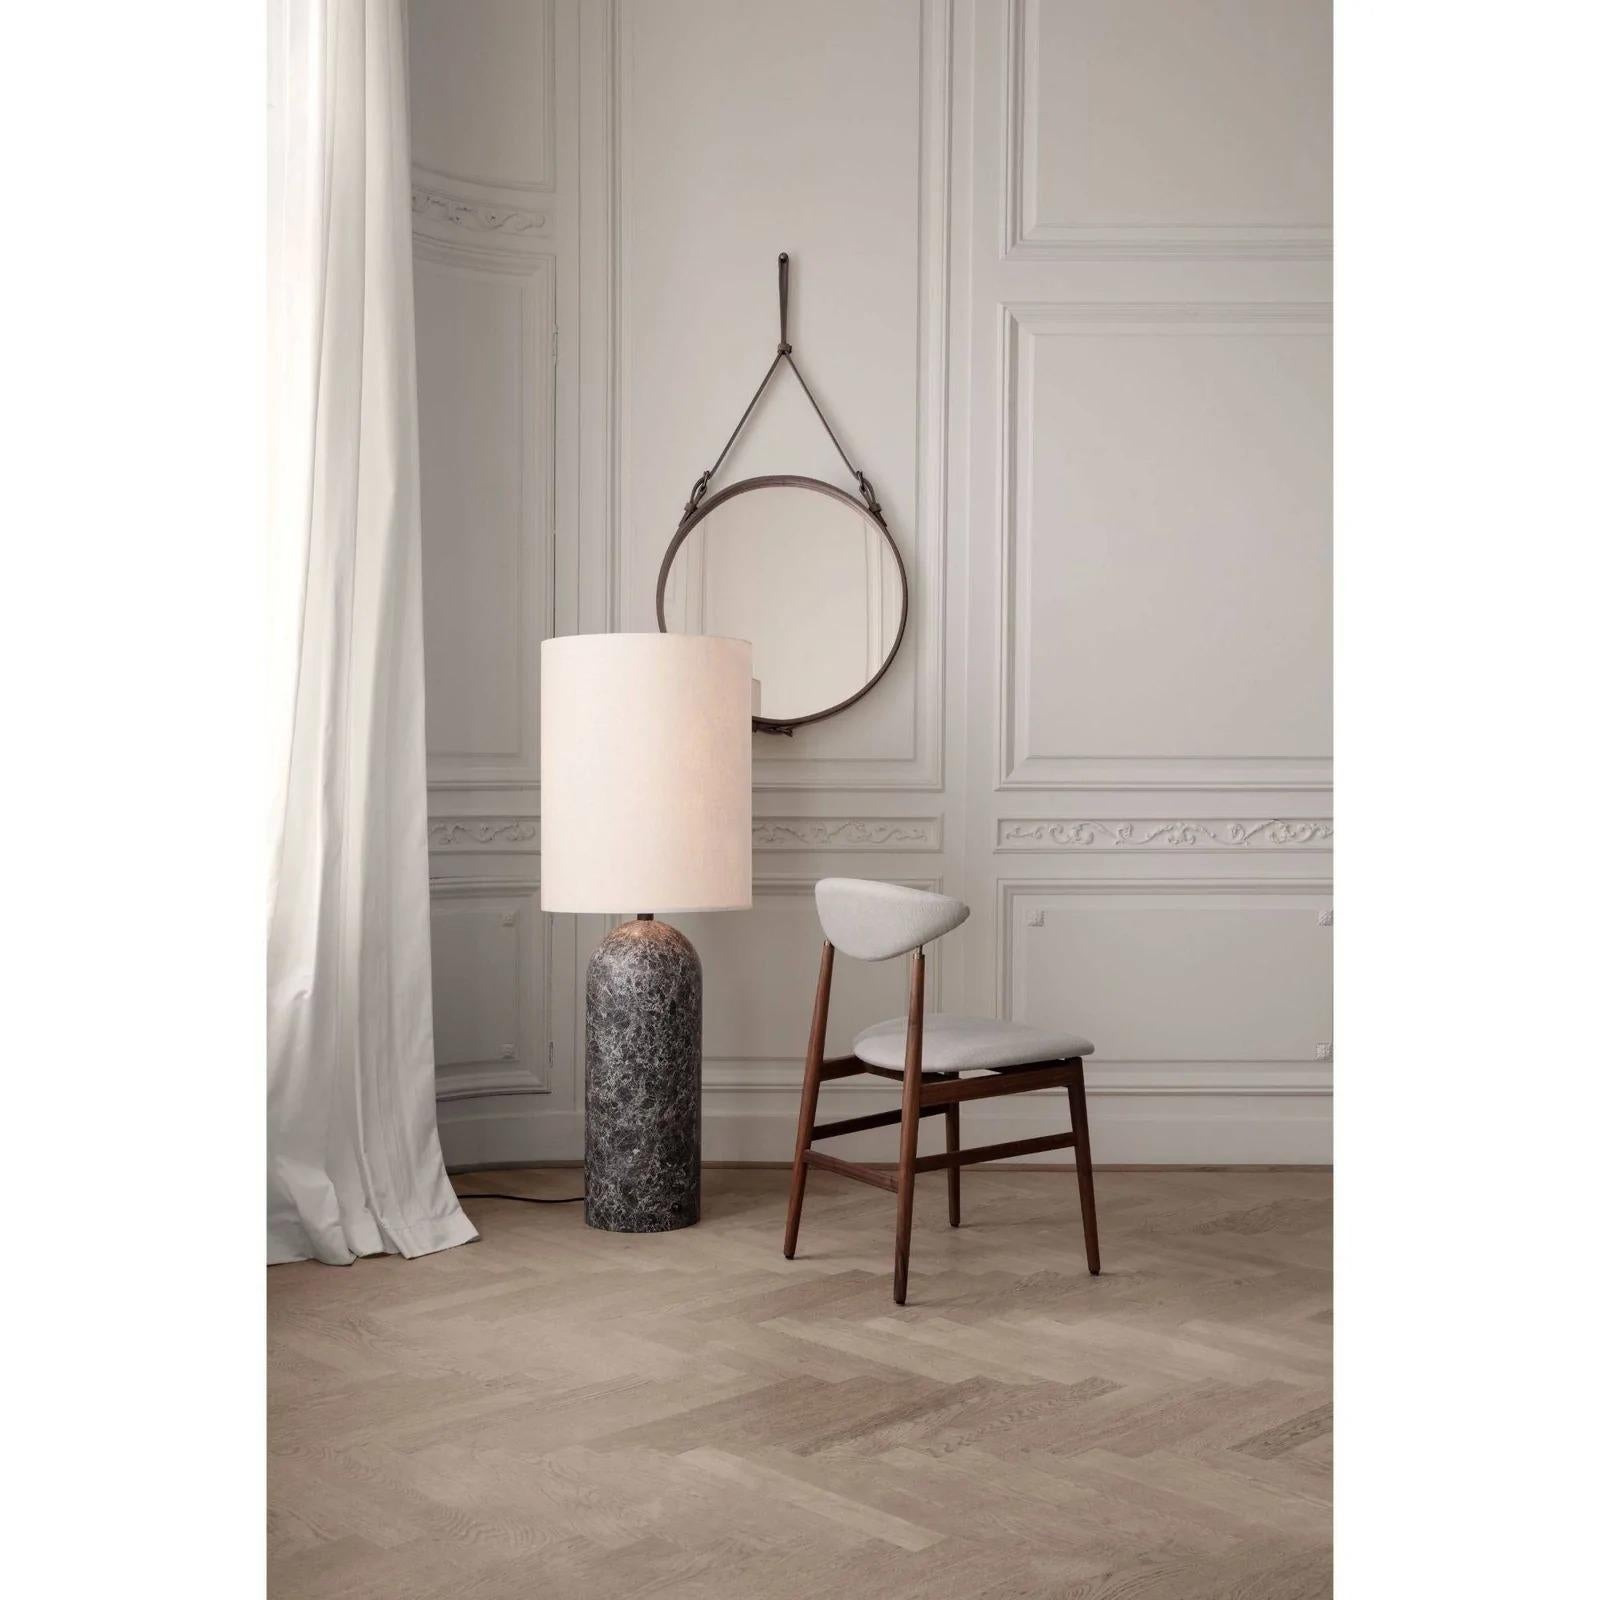 Contemporary Gravity Floor Lamp - XL High, Grey Marble, White For Sale